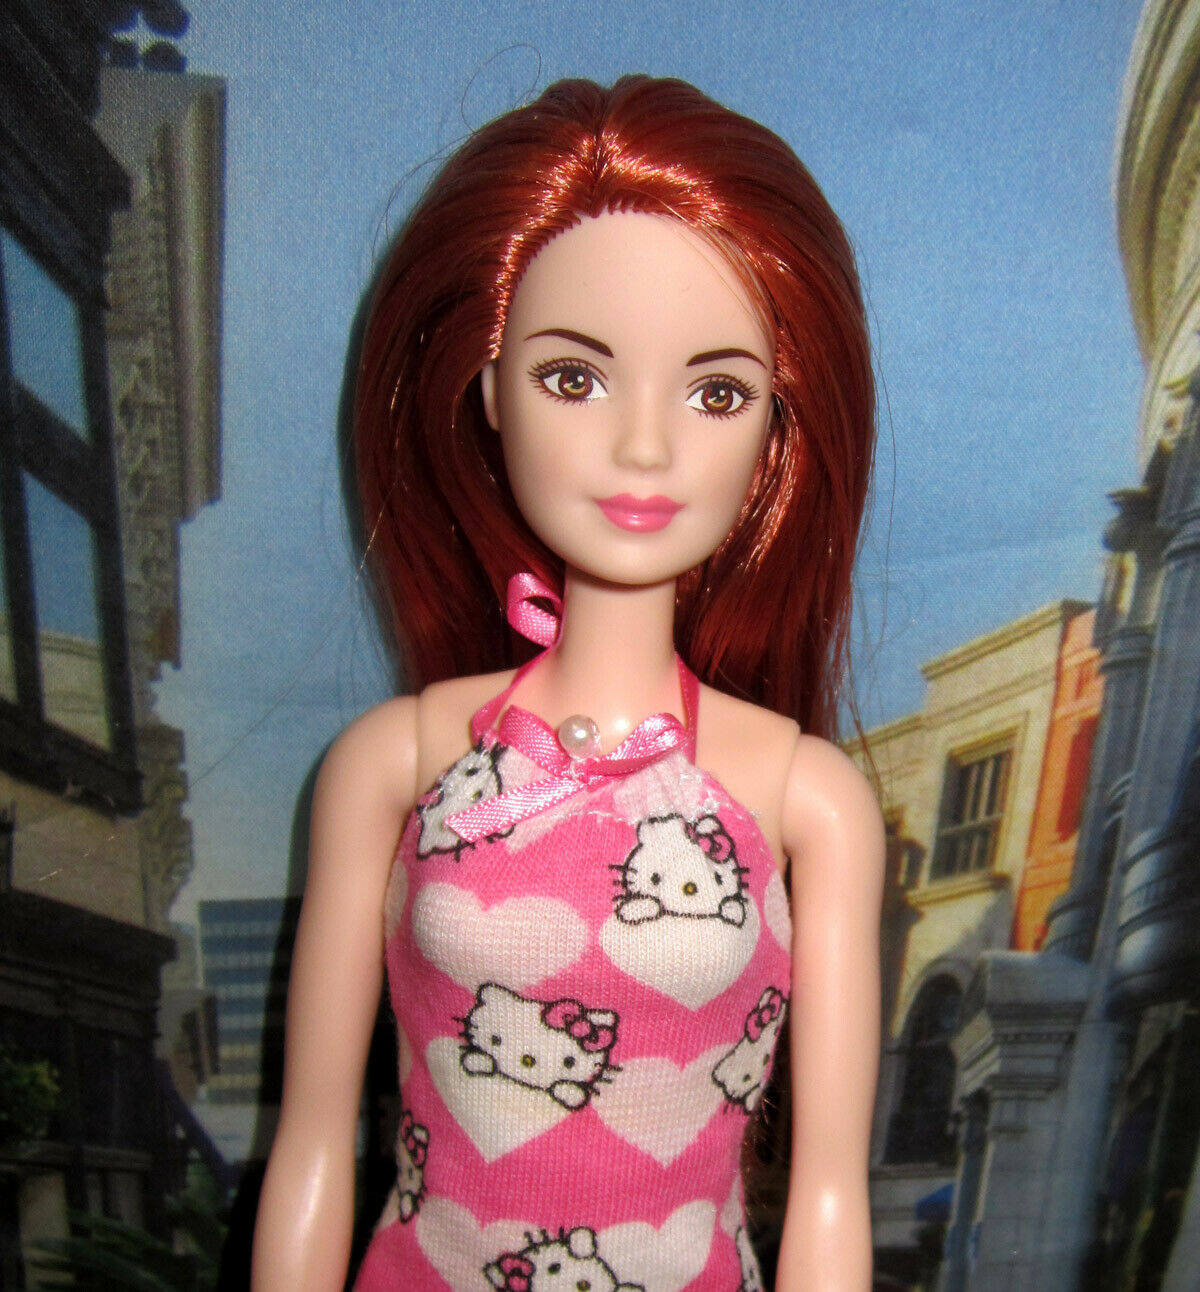 Redhead Barbie Fashionista Red Hair Doll Deboxed With Ooak Hello Kitty Dress New